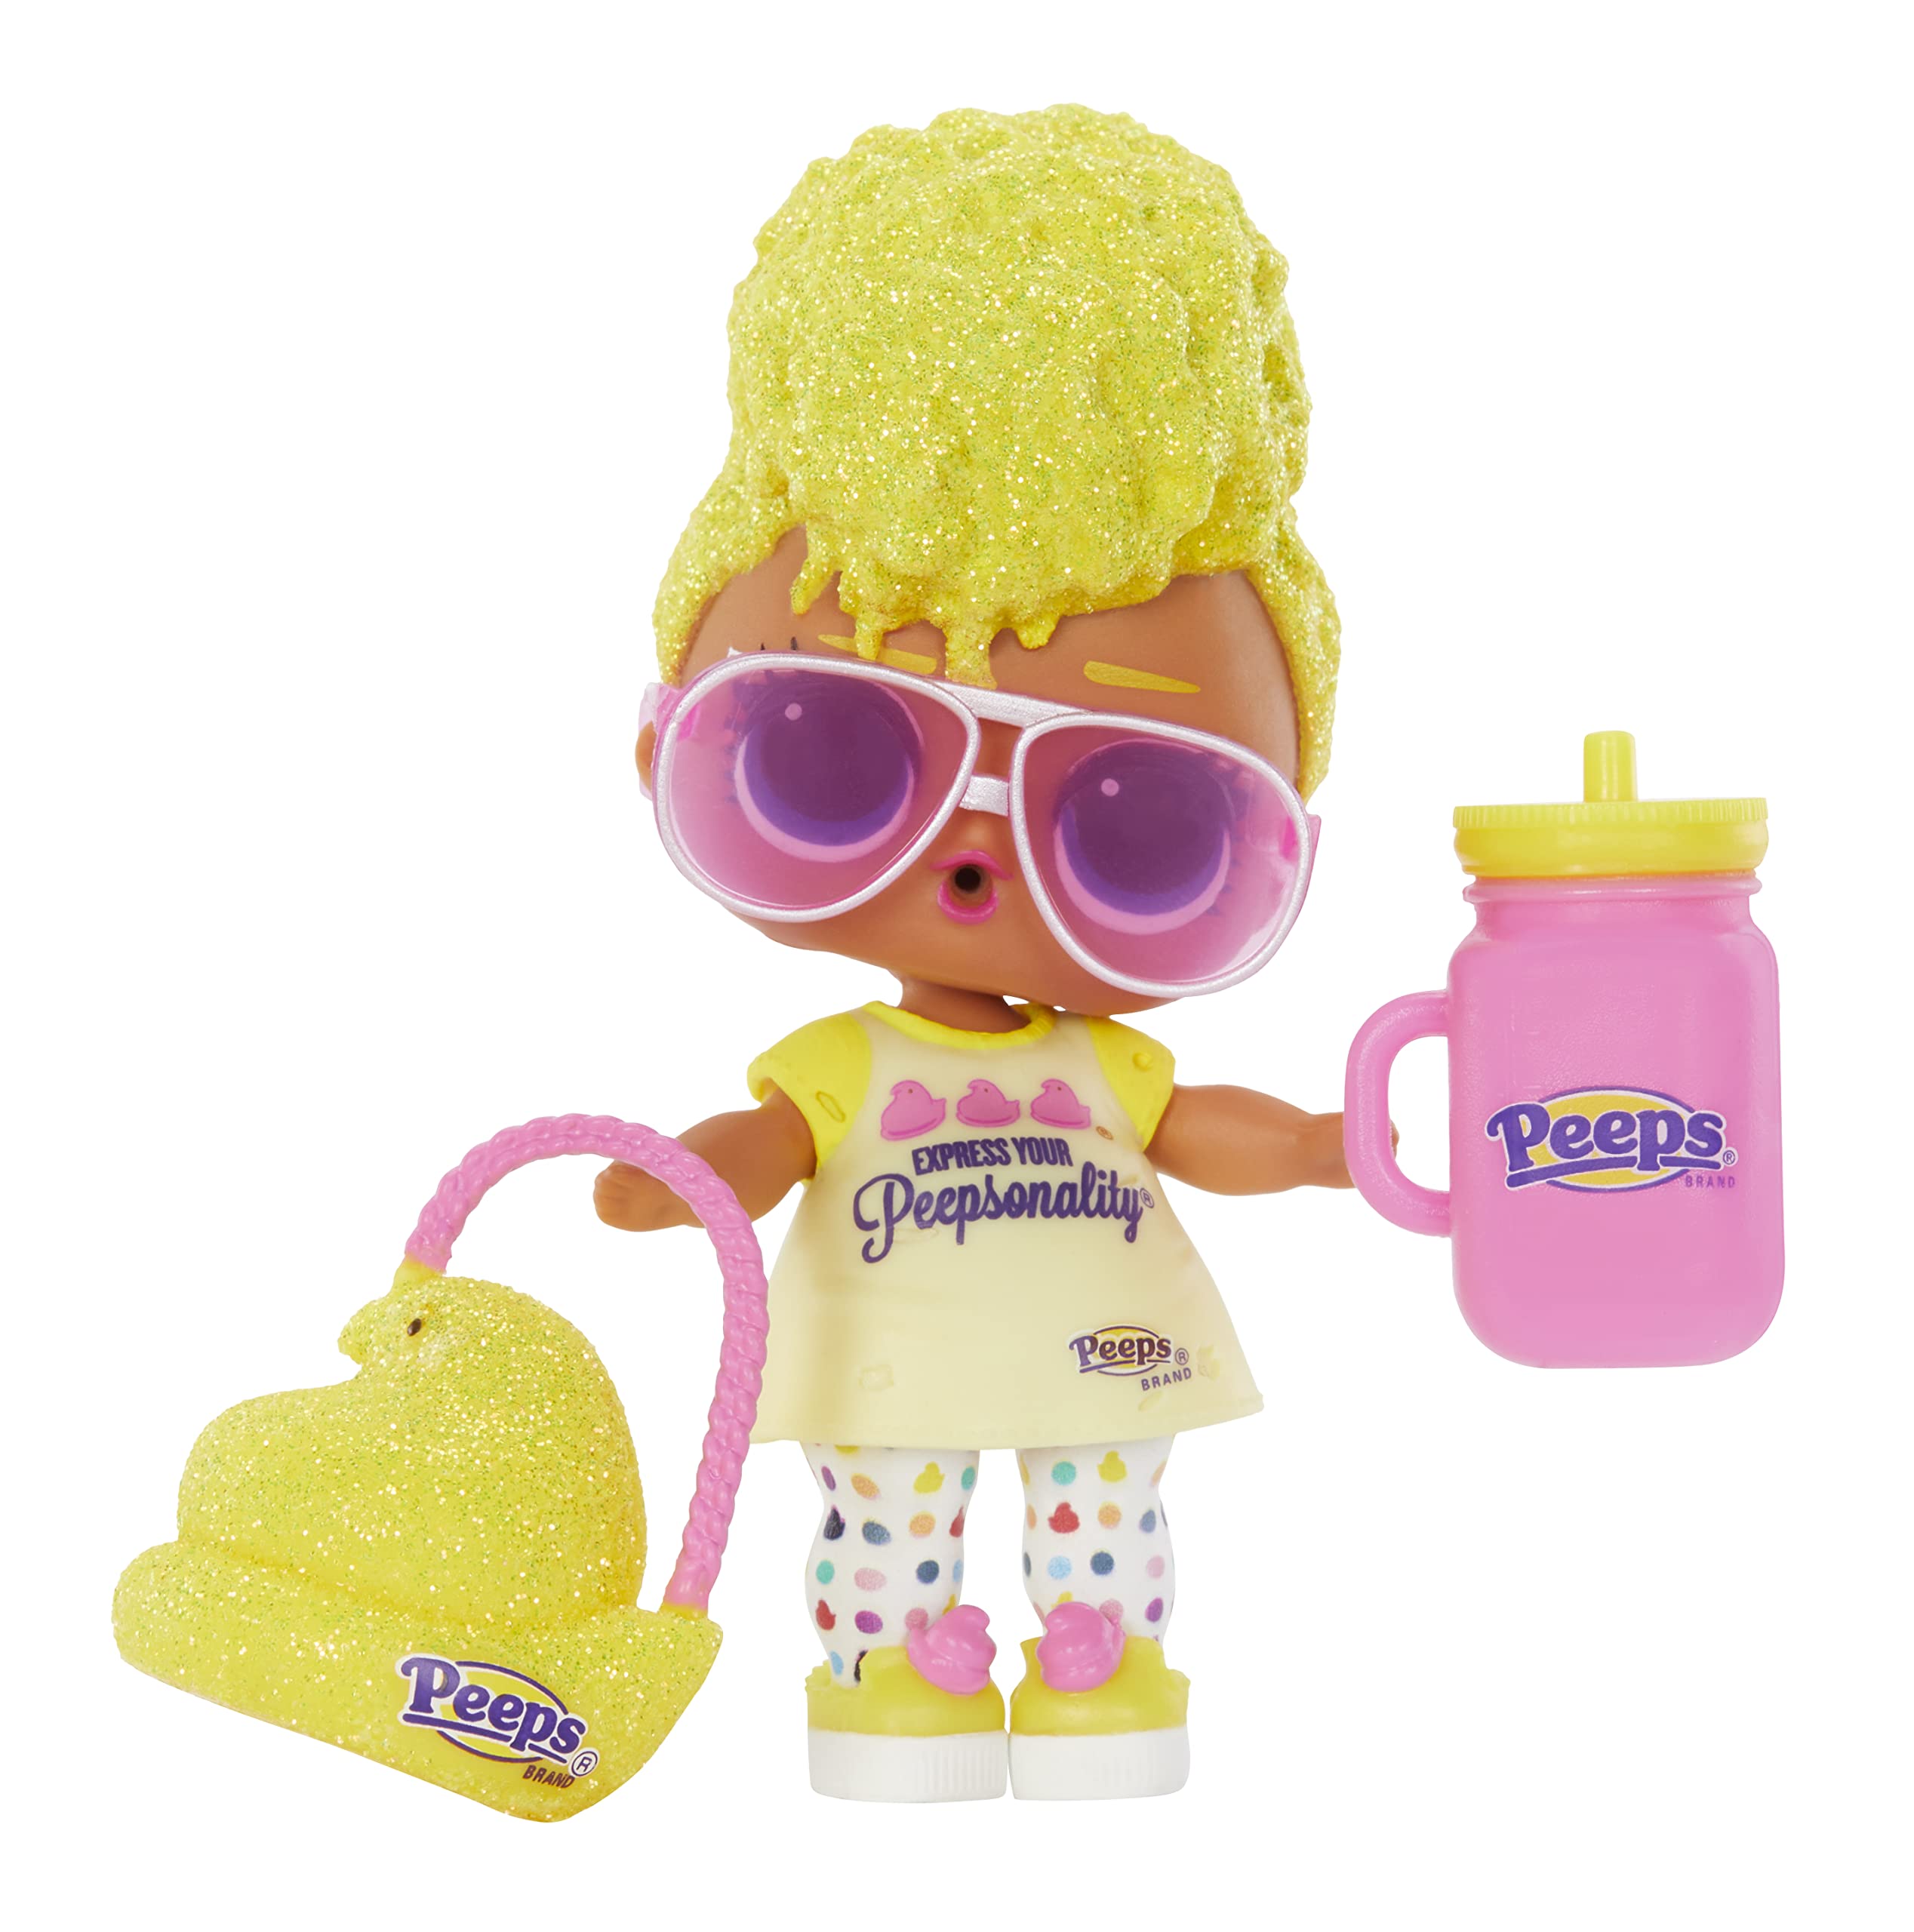 LOL Surprise Loves Mini Sweets Peeps- Tough Chick with Collectible Doll, 7 Surprises, Spring Theme, Peeps Limited Edition Doll- Great Gift for Girls Age 4+